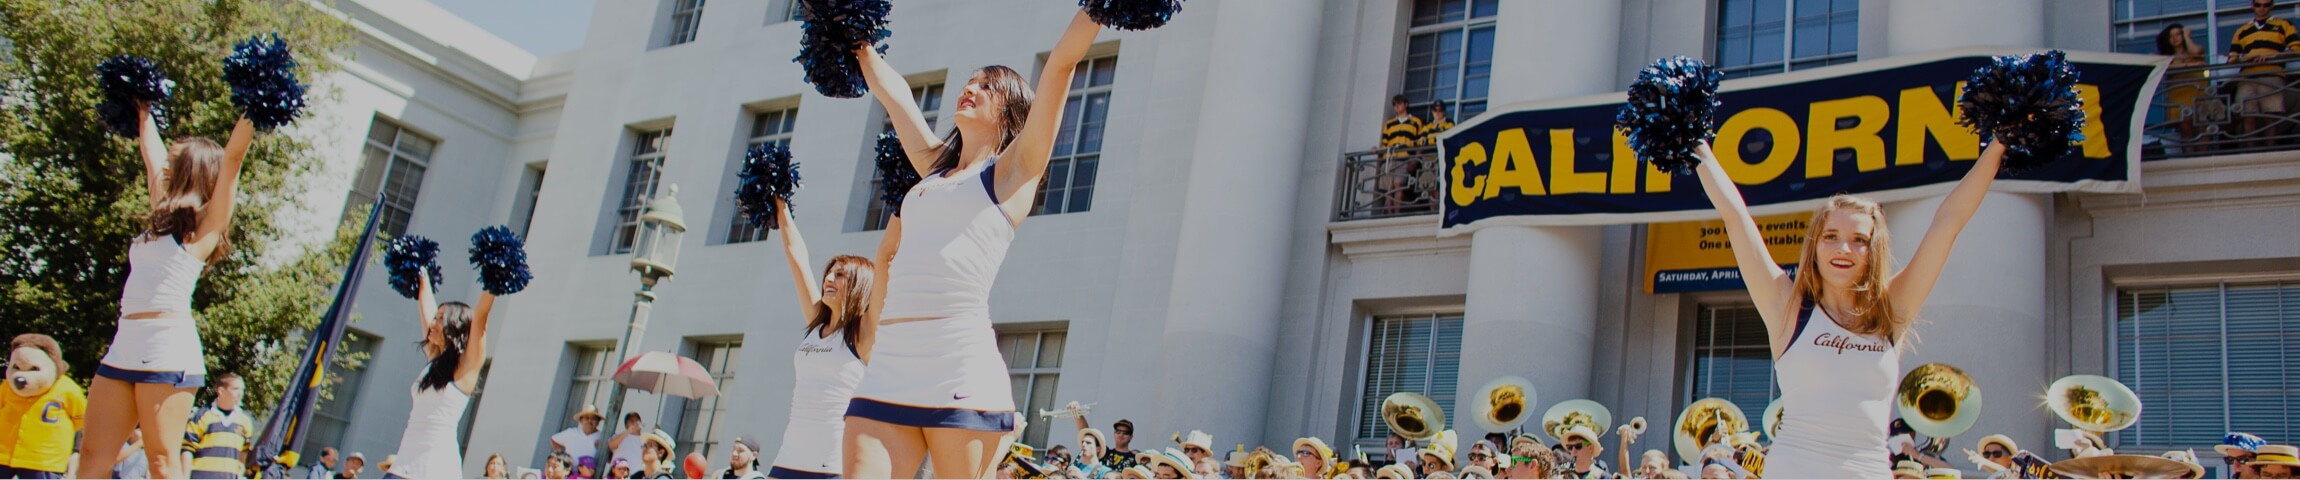 Photo of UC Berkeley cheerleaders with the Cal marching band